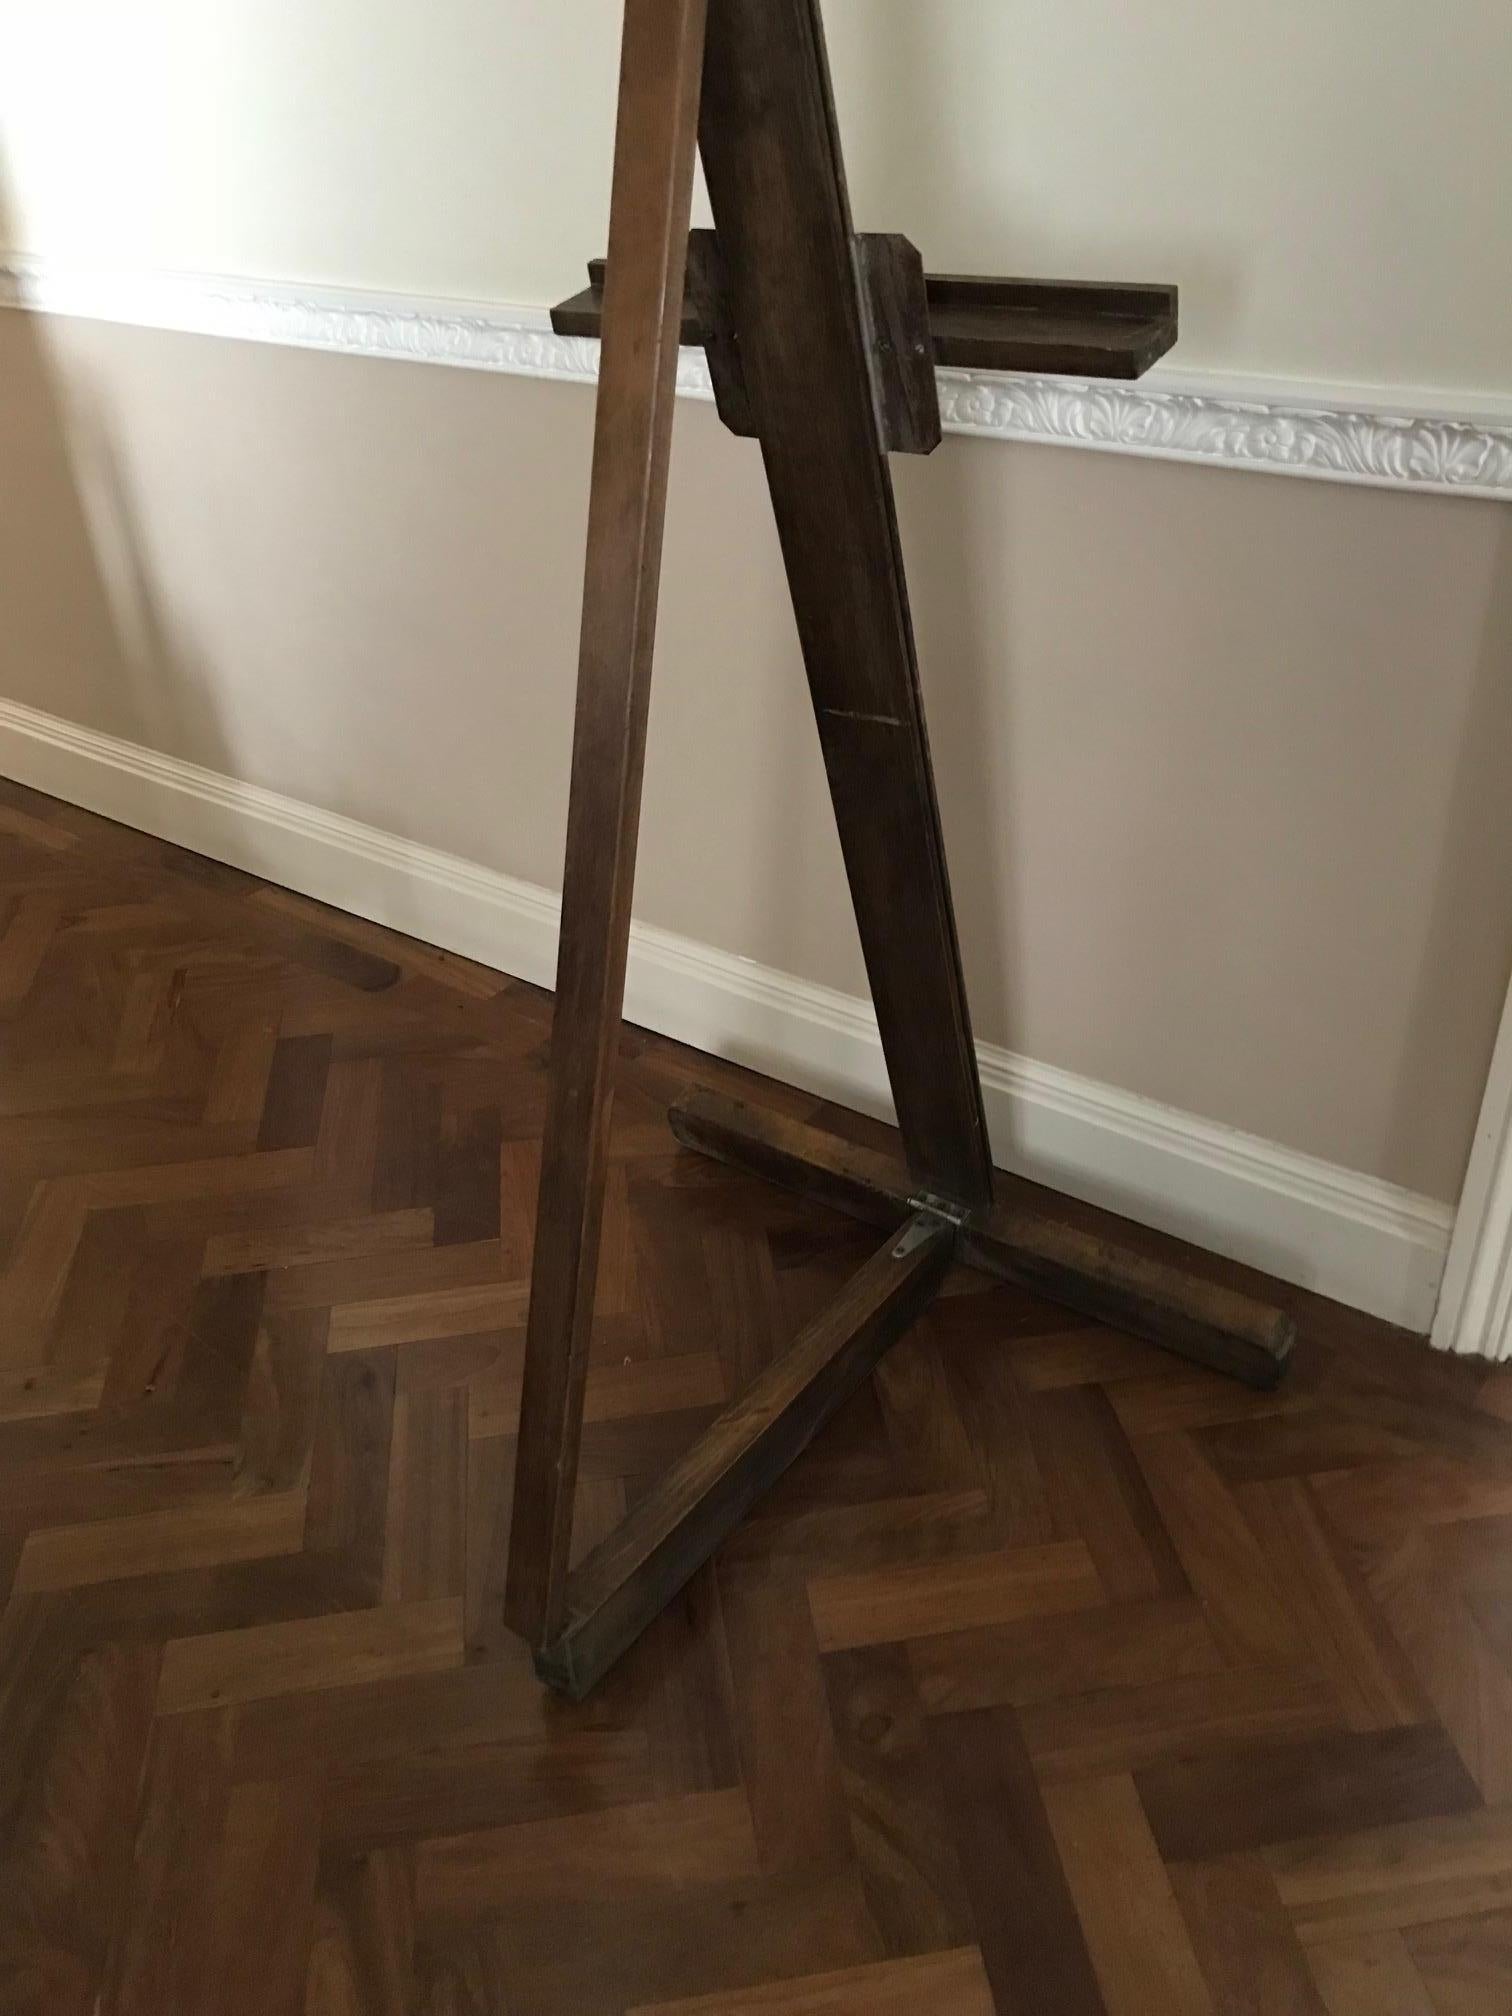 1950s American Anco Bilt Easel In Fair Condition For Sale In London, GB